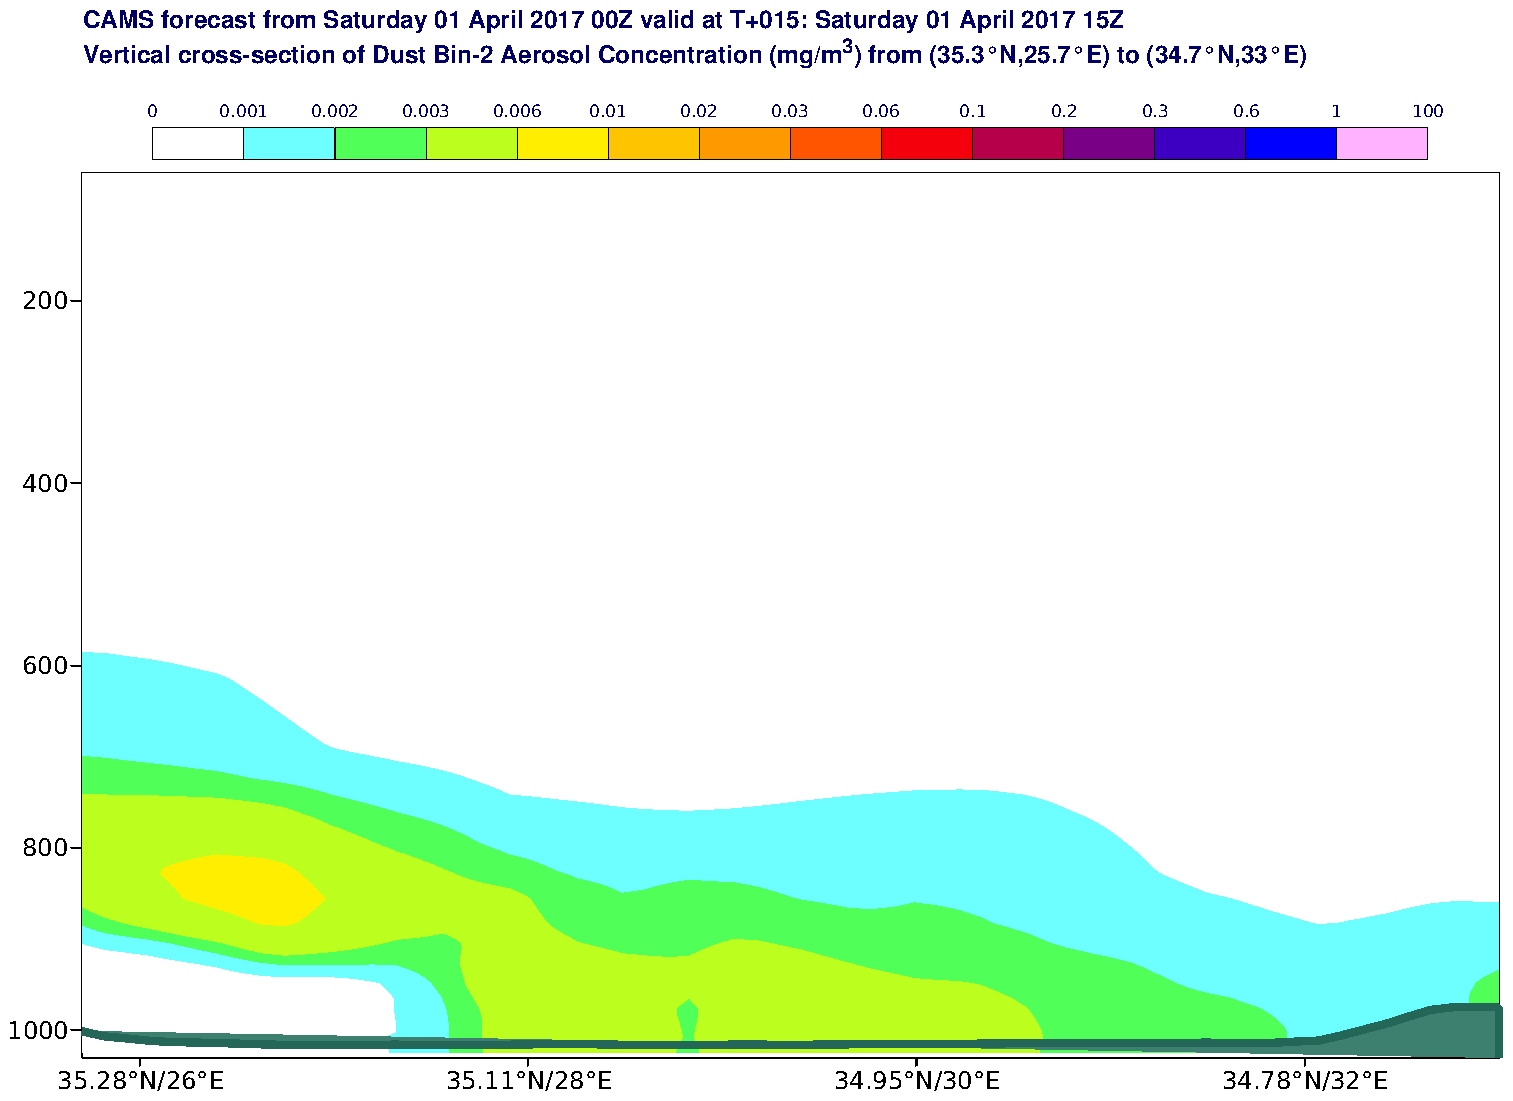 Vertical cross-section of Dust Bin-2 Aerosol Concentration (mg/m3) valid at T15 - 2017-04-01 15:00